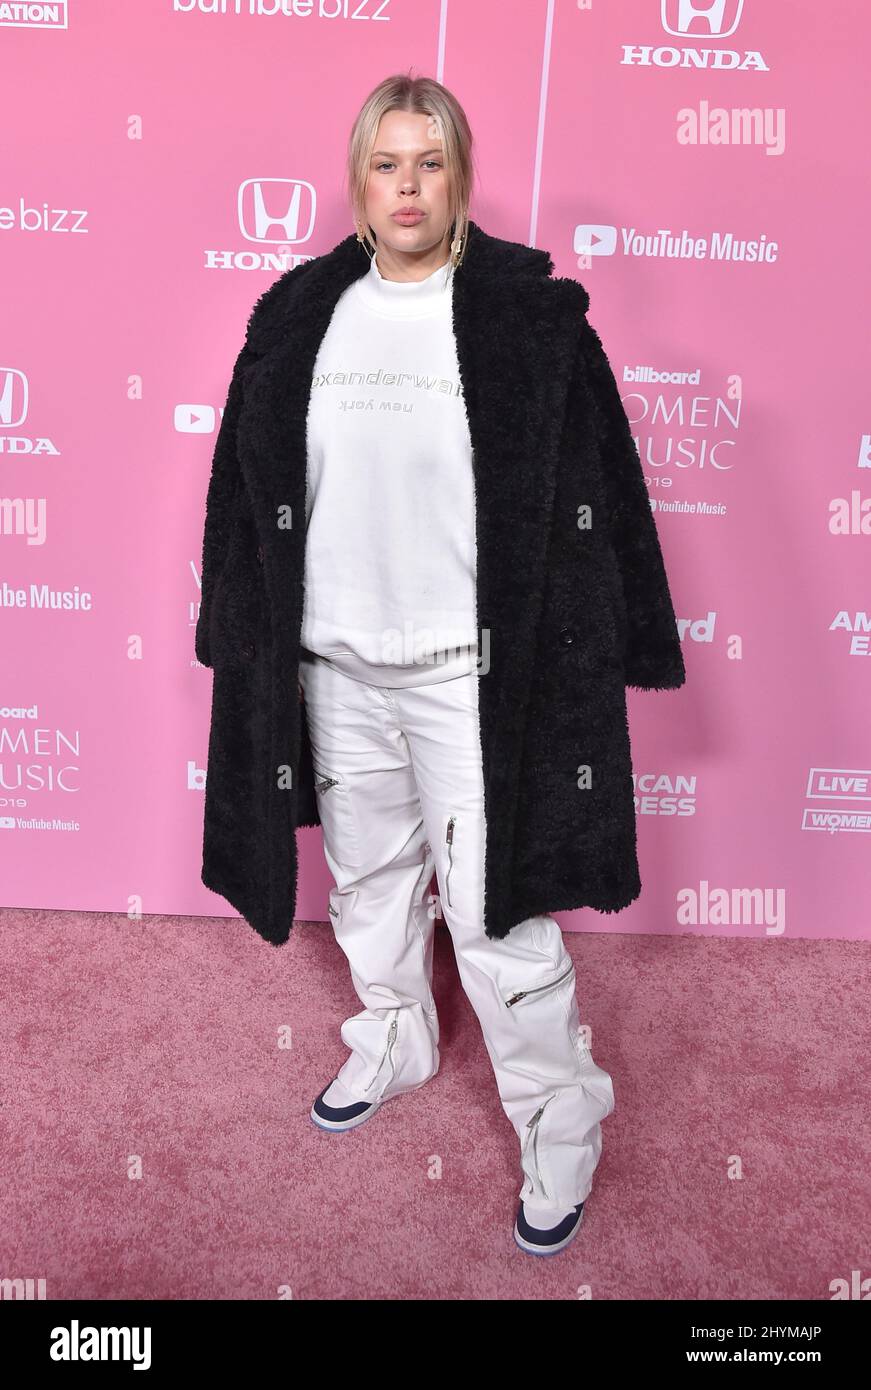 SAYGRACE attending the Billboard's Women In Music 2019 event in Hollywood, USA on Thursday December 13, 2019. Stock Photo